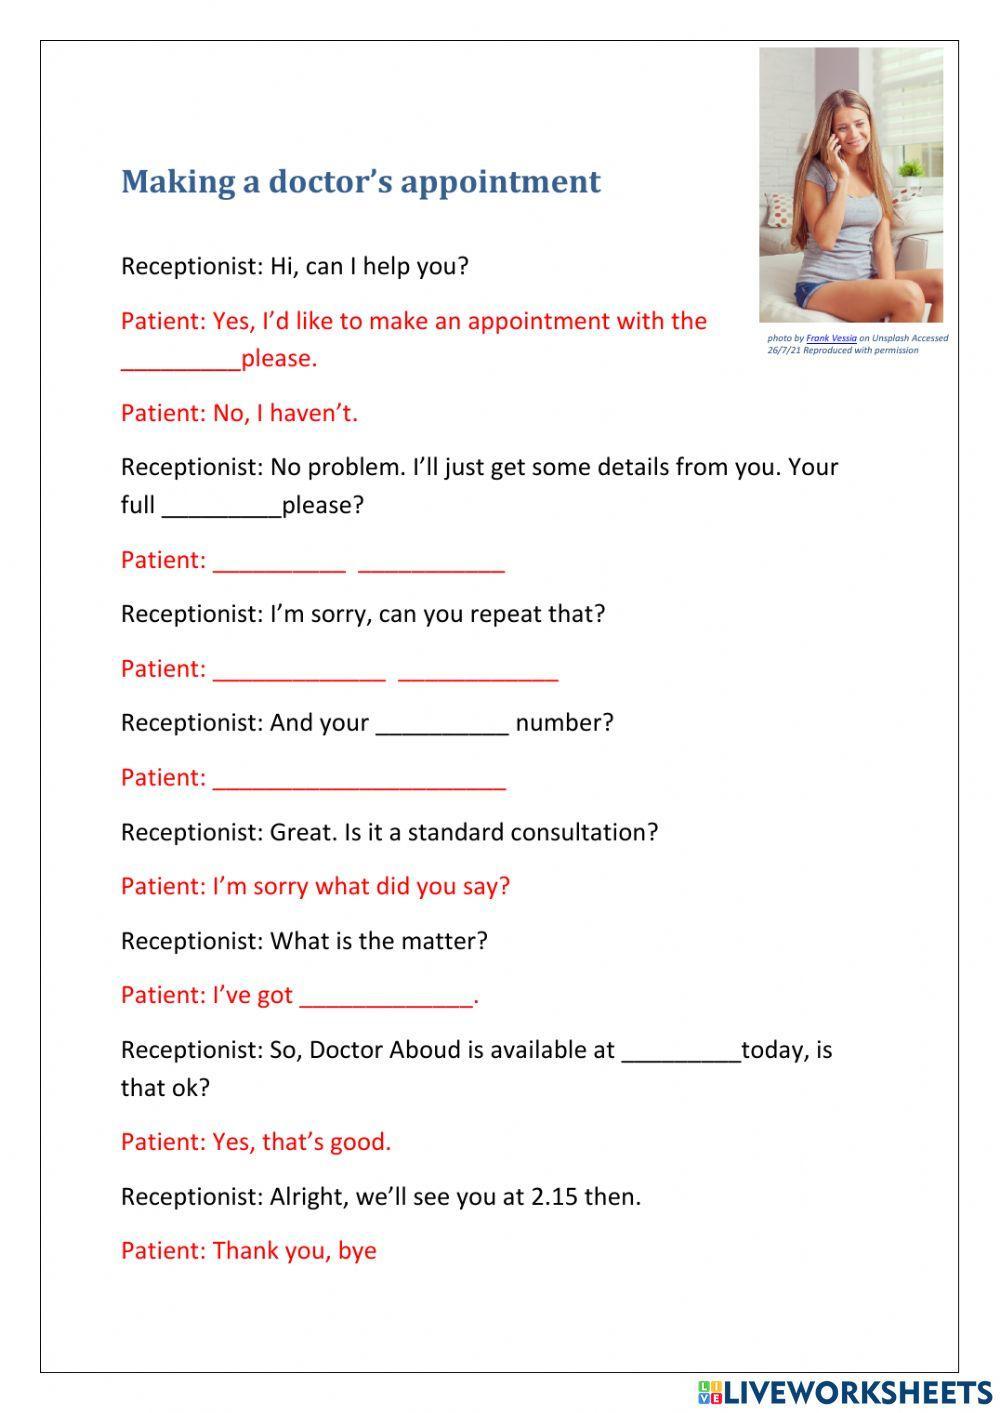 making-a-doctor-s-appointment-interactive-worksheet-live-worksheets